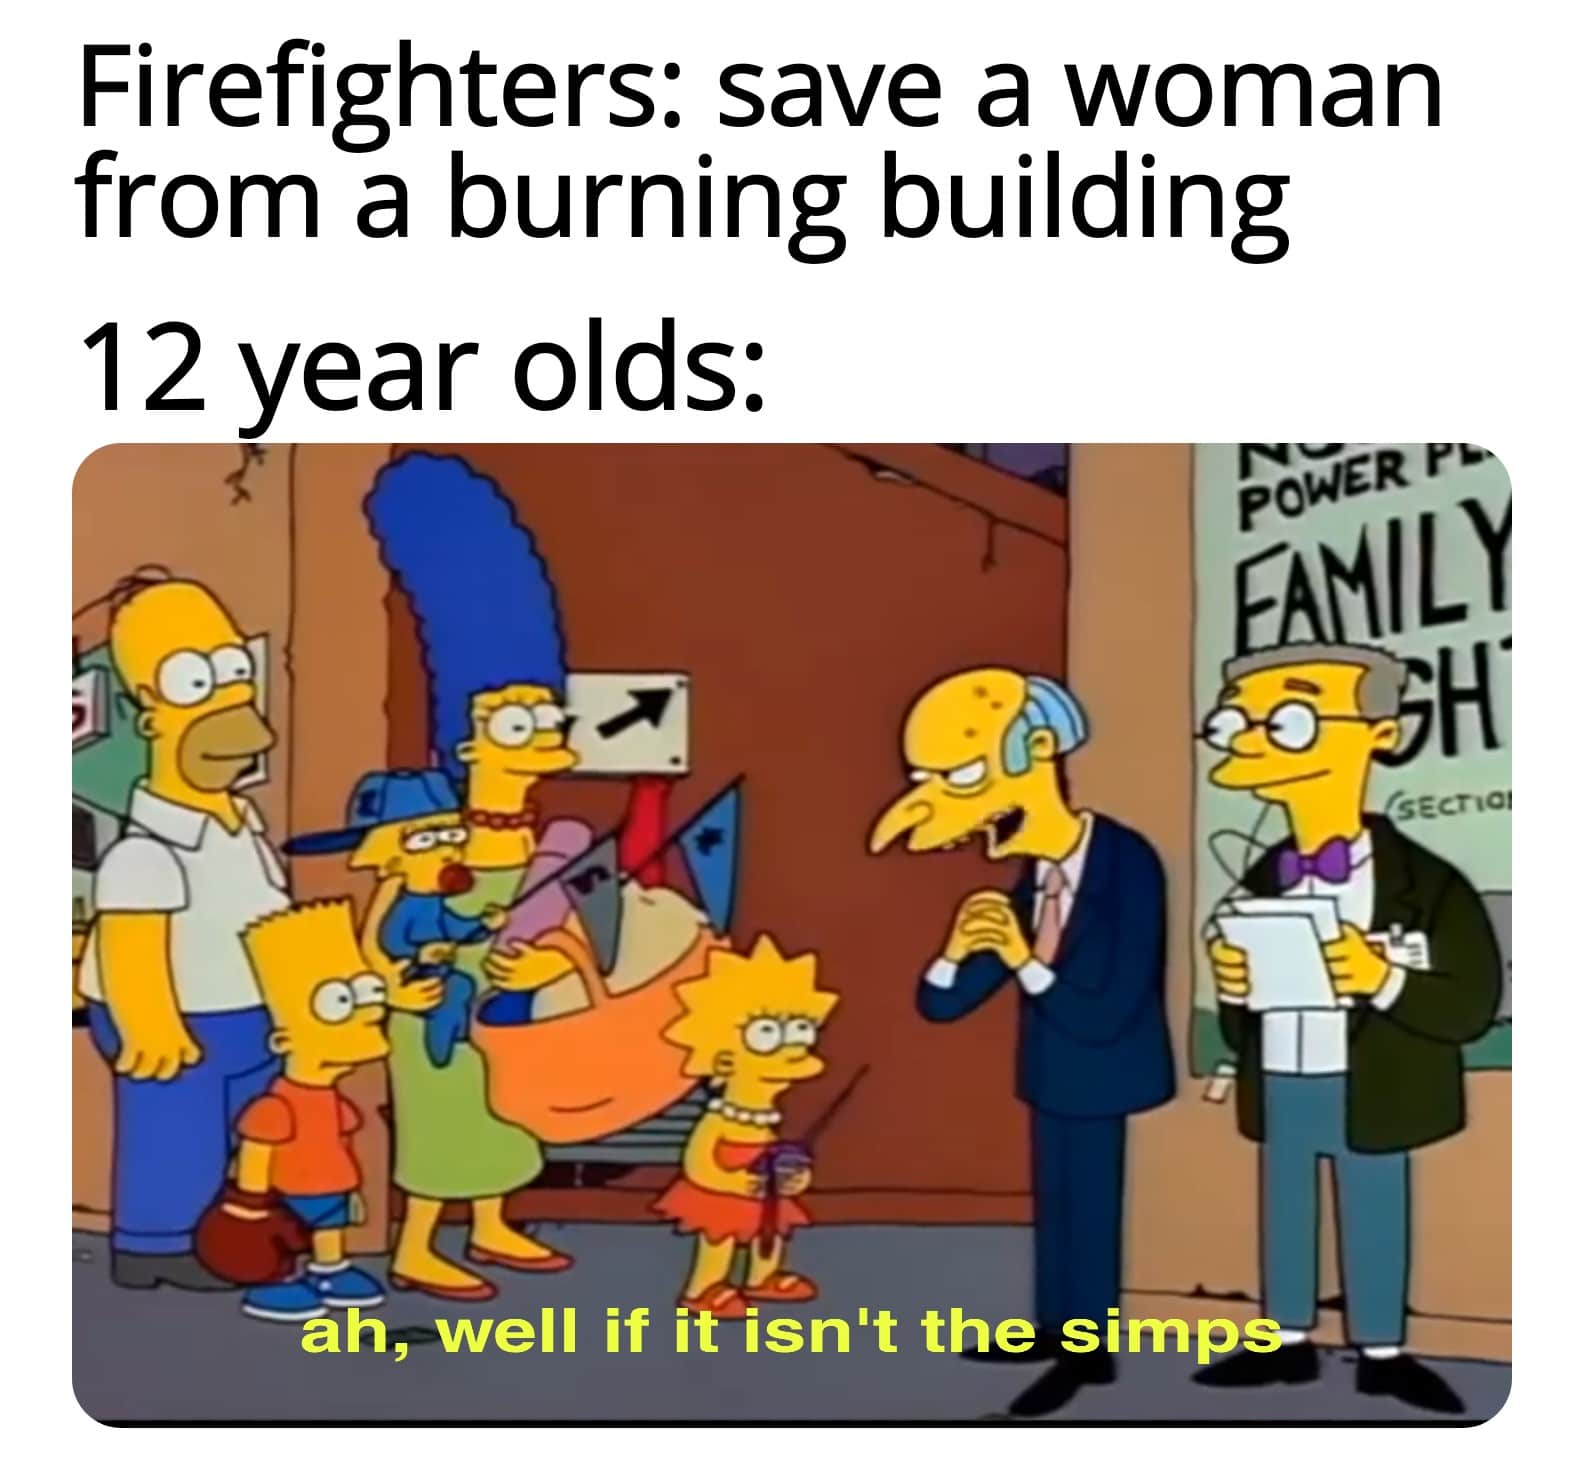 Funny, Simps, Firefighters other memes Funny, Simps, Firefighters text: Firefighters: save a woman from a burning building 1 2 year olds: POWER 'SECT' ah, well if it isn't the 